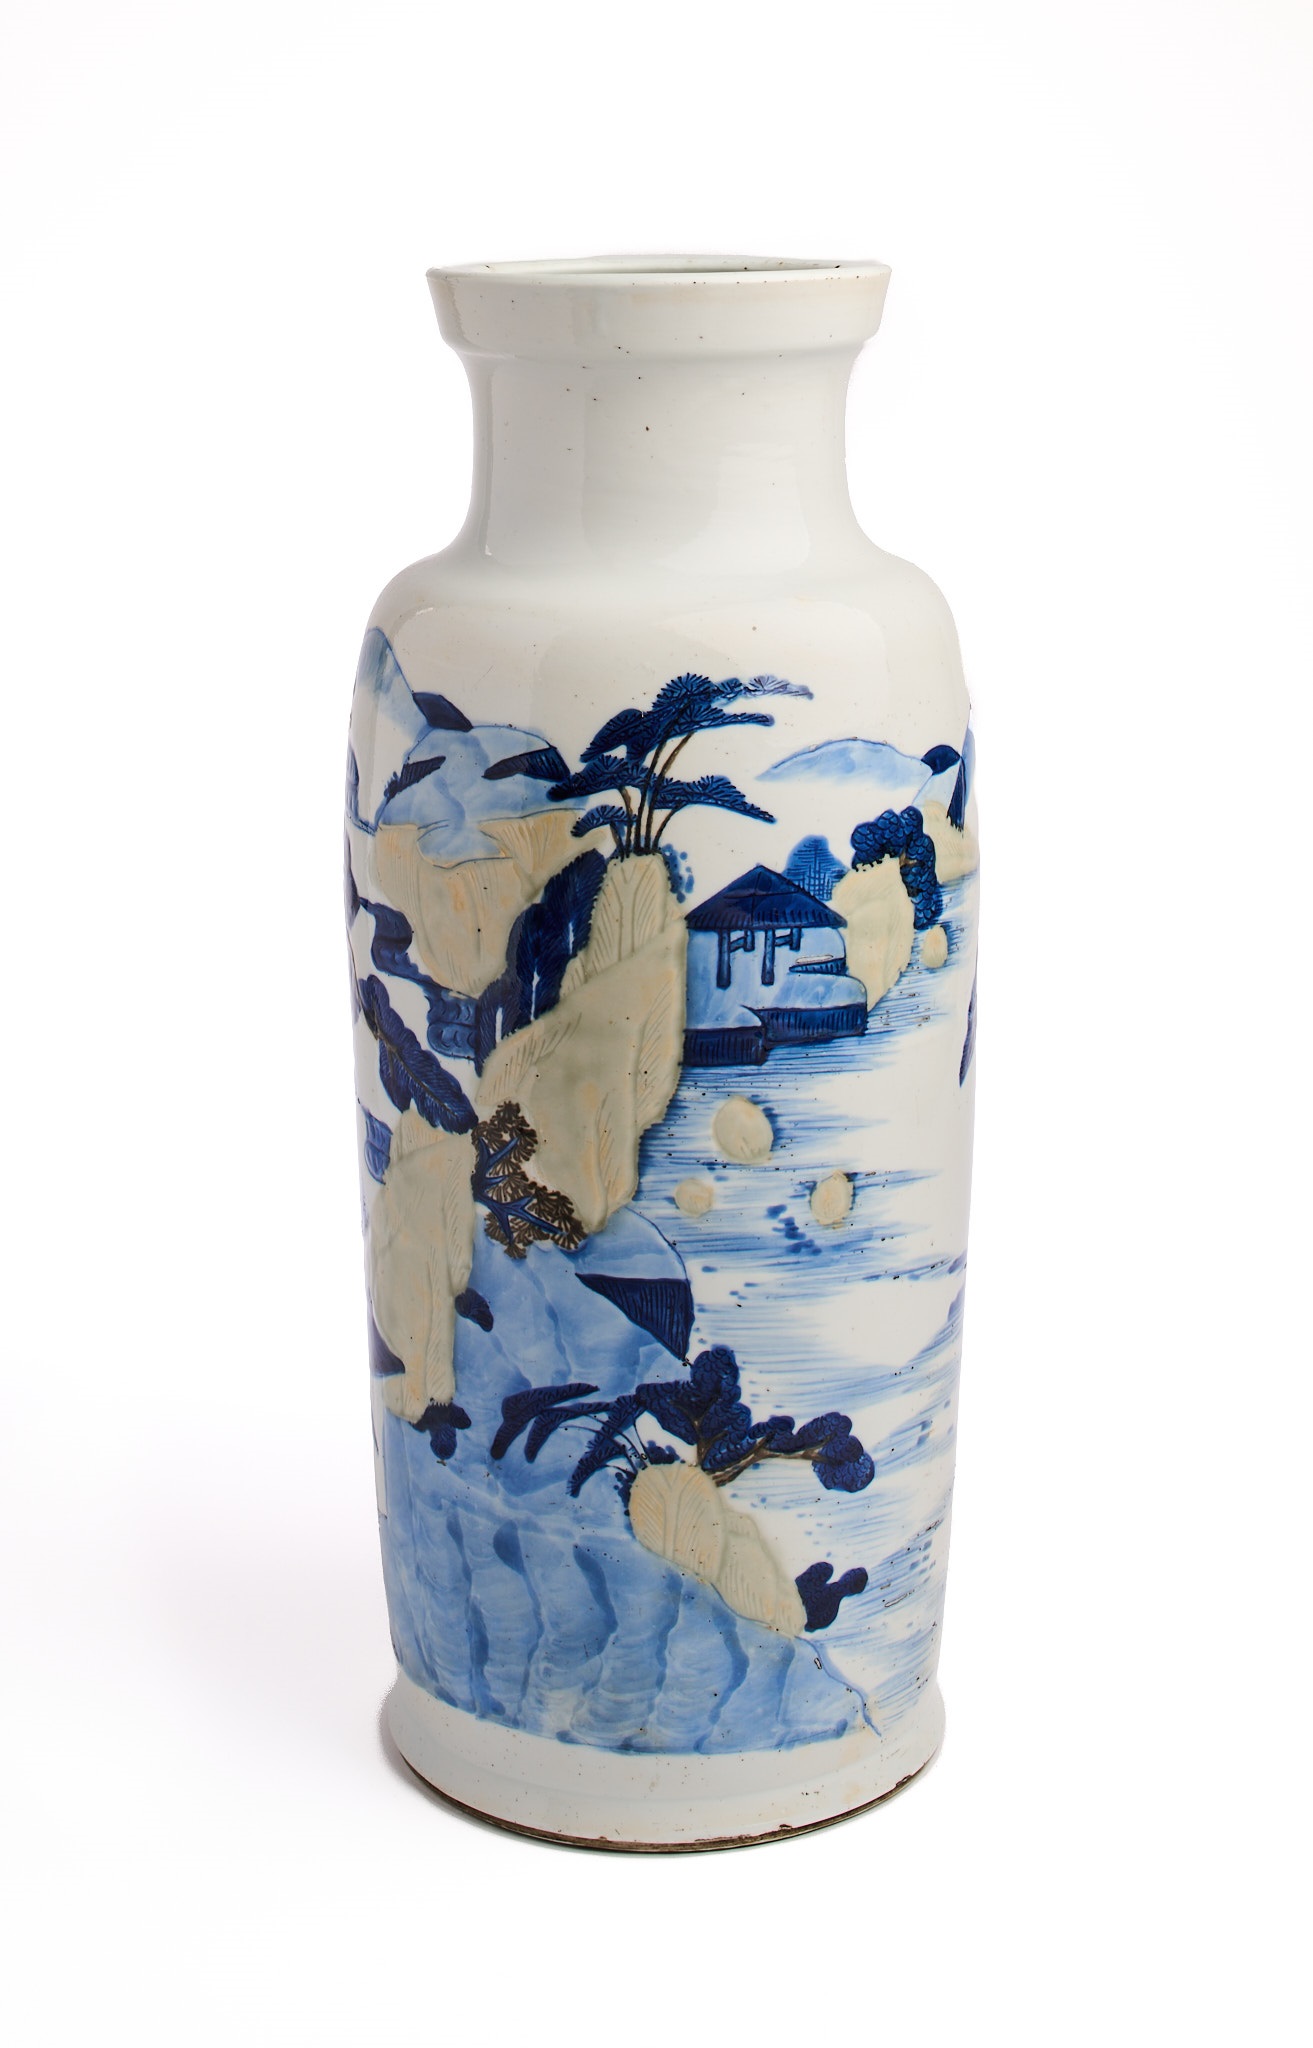 A CHINESE UNDERGLAZE-BLUE, COPPER RED, AND CELADON-GLAZED CARVED ROULEAU VASE, KANGXI PERIOD (1662-1 - Image 2 of 2